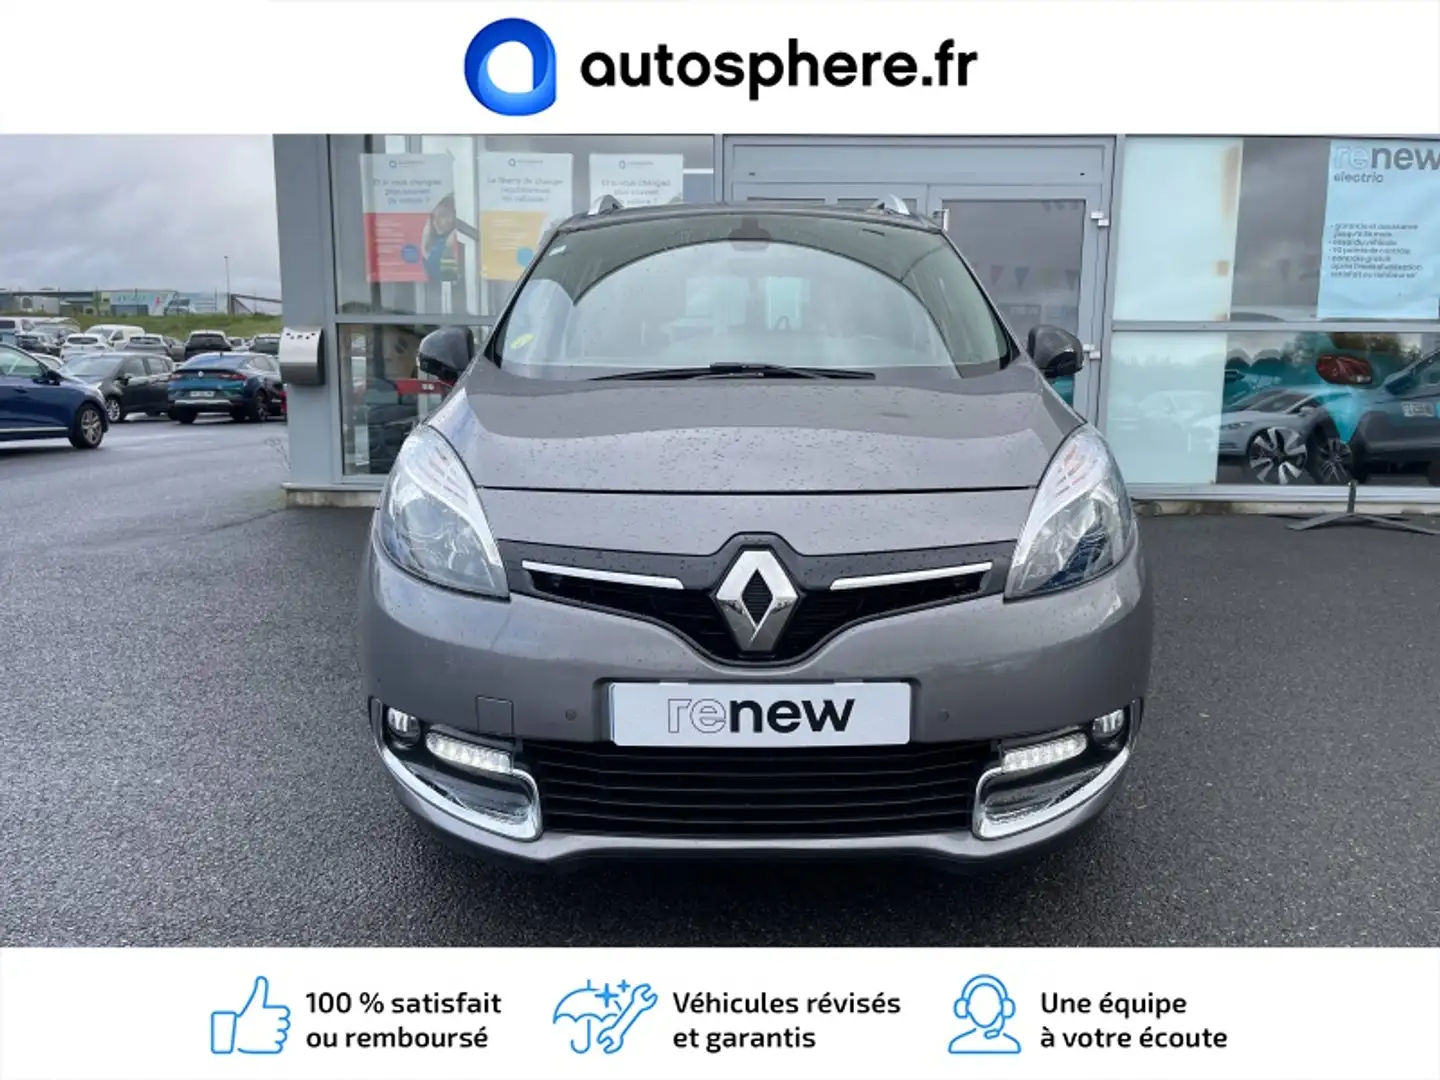 Renault Grand Scenic 1.5 dCi 110 Bose 7 places Gps Caméra Gtie 1an - 2